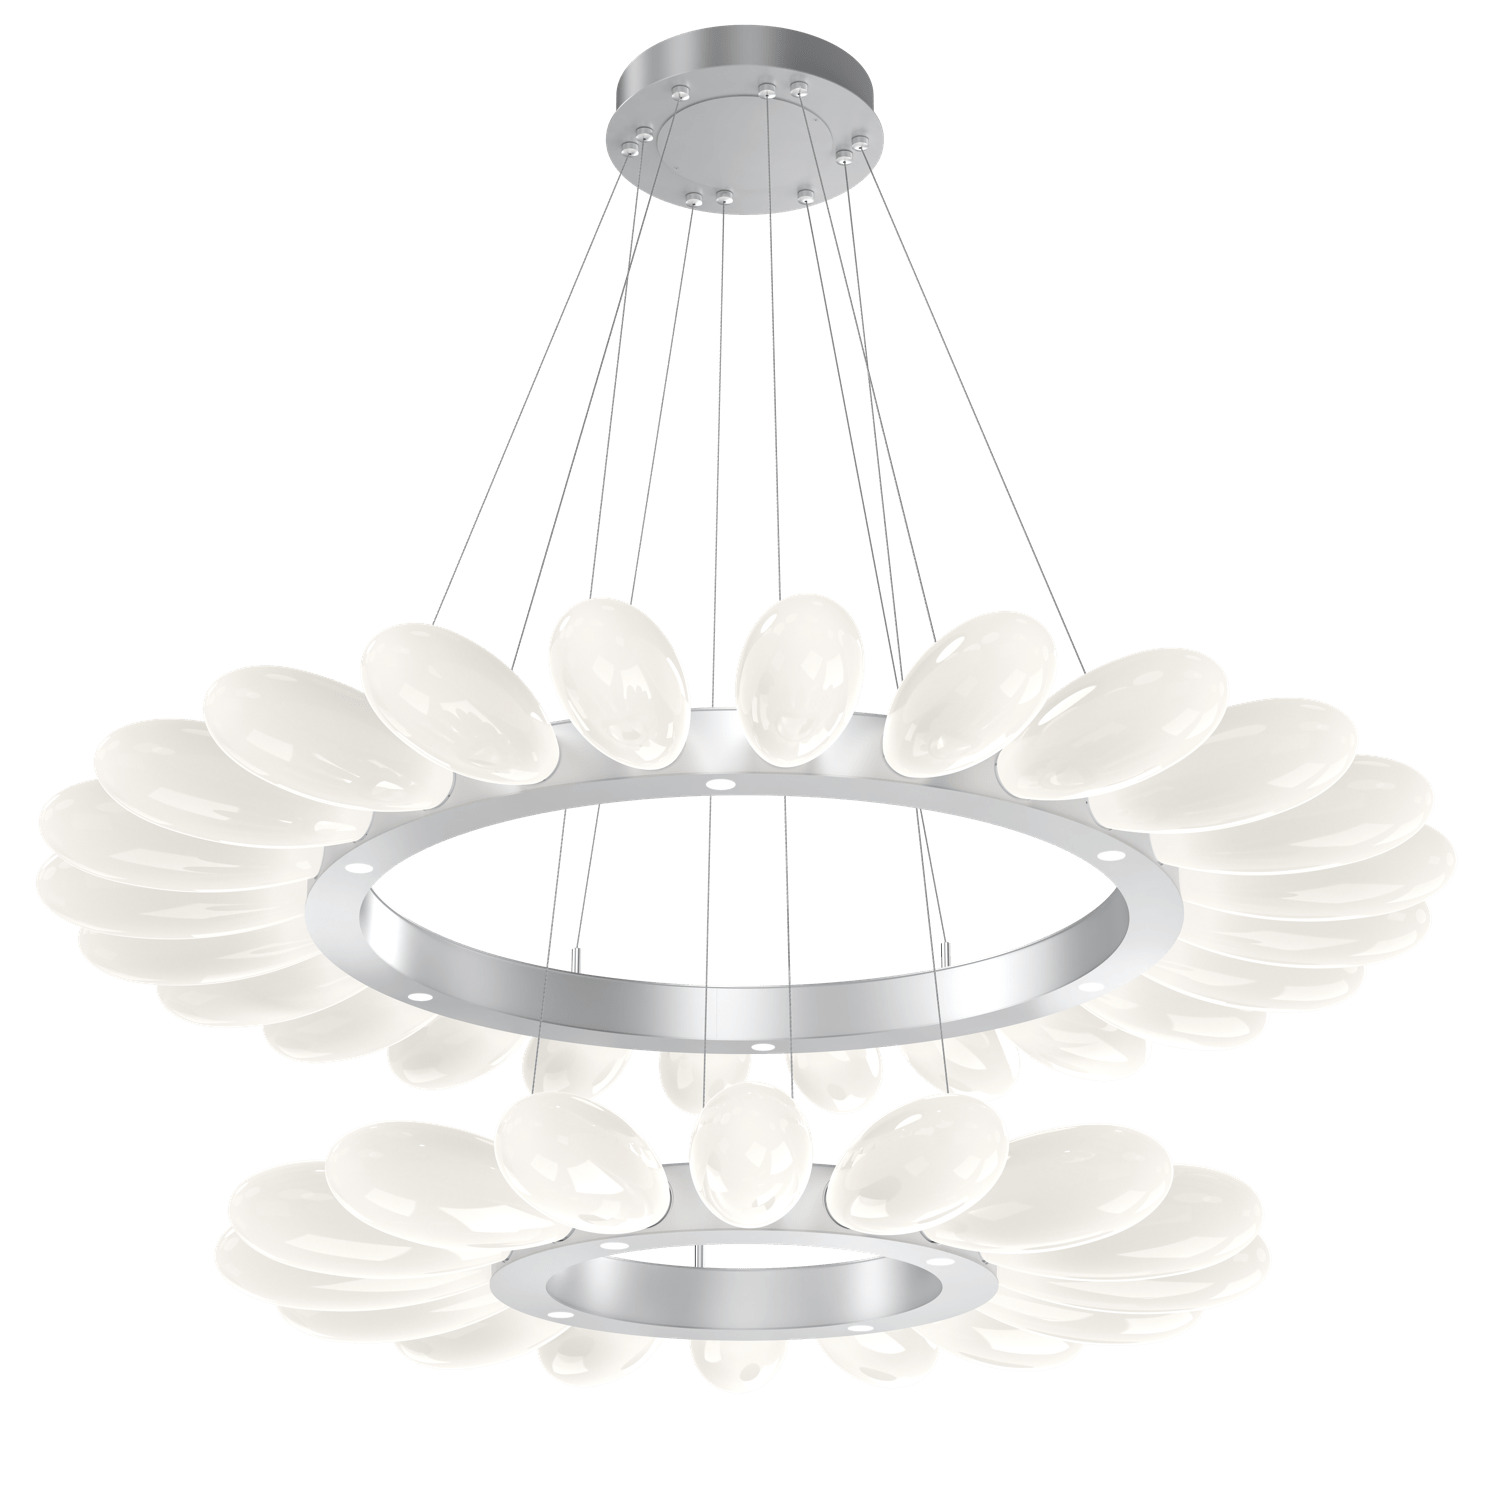 CHB0071-2T-CS-WL-LL-Hammerton-Studio-Fiori-53-inch-two-tier-radial-ring-chandelier-with-classic-silver-finish-and-opal-white-glass-shades-and-LED-lamping